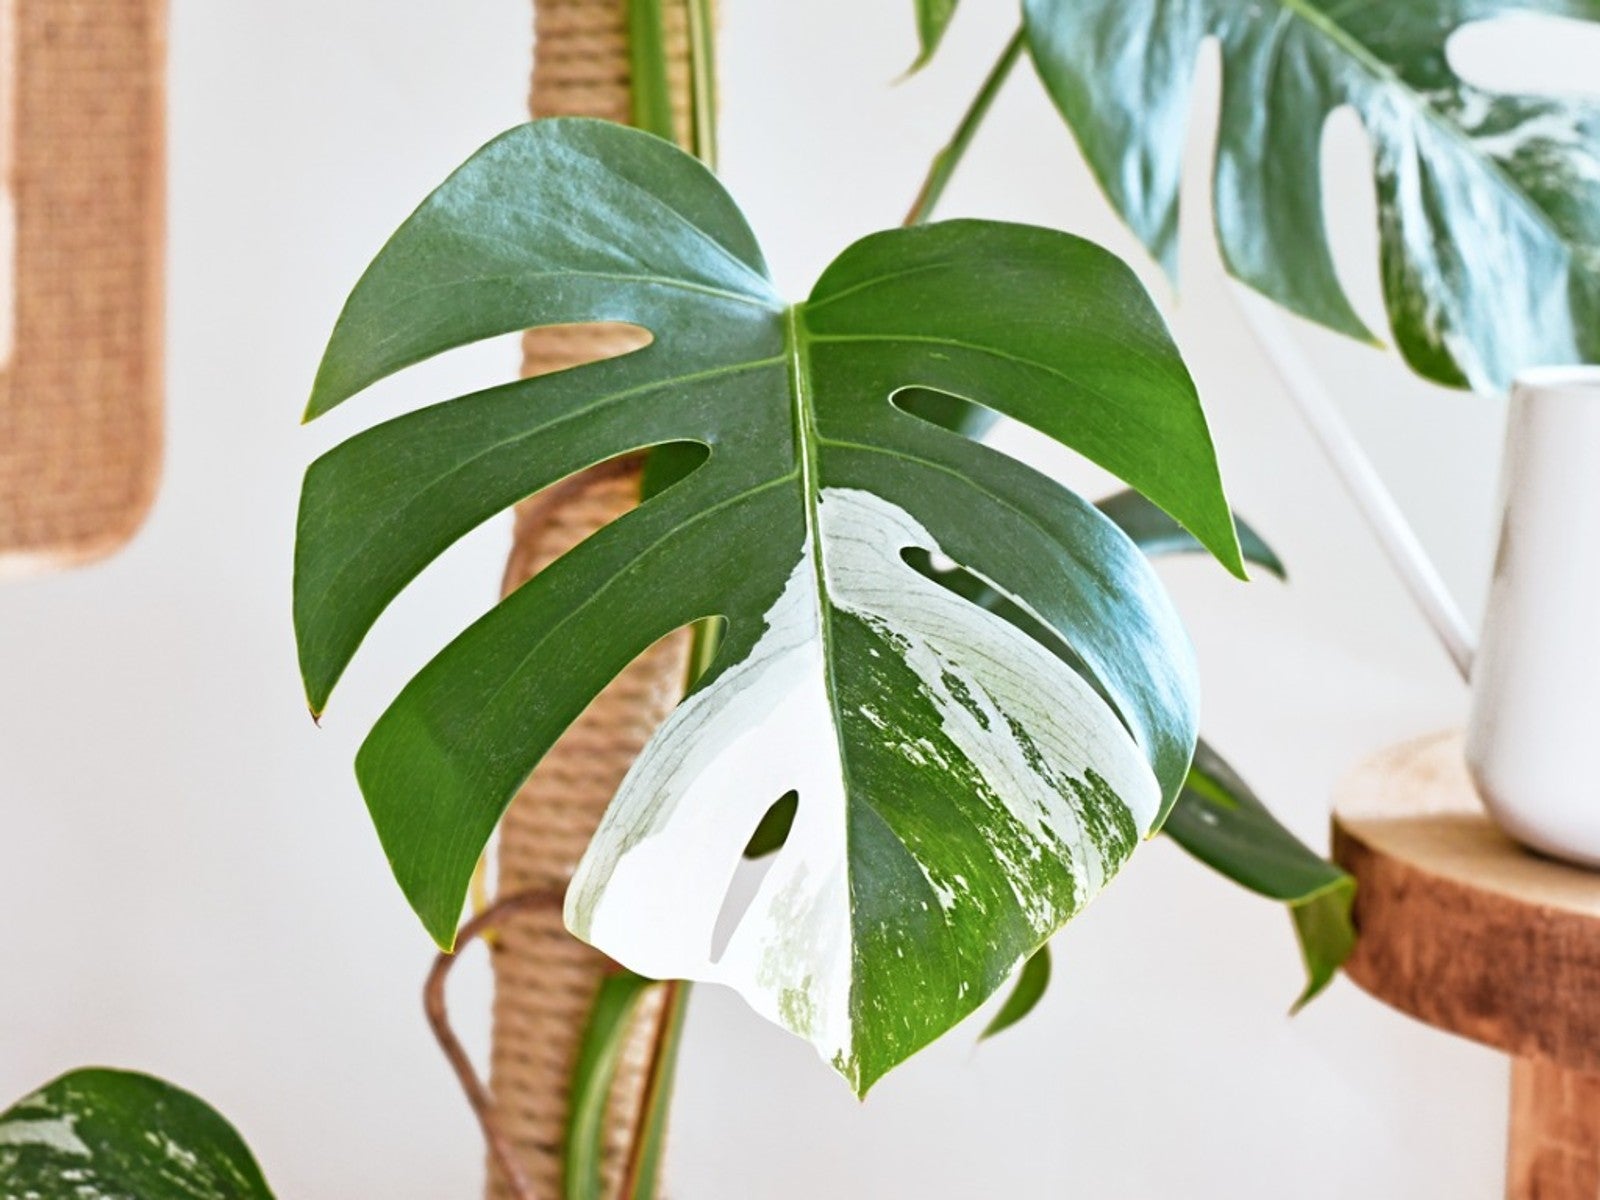 The white and green leaf of a variegated monstera houseplant